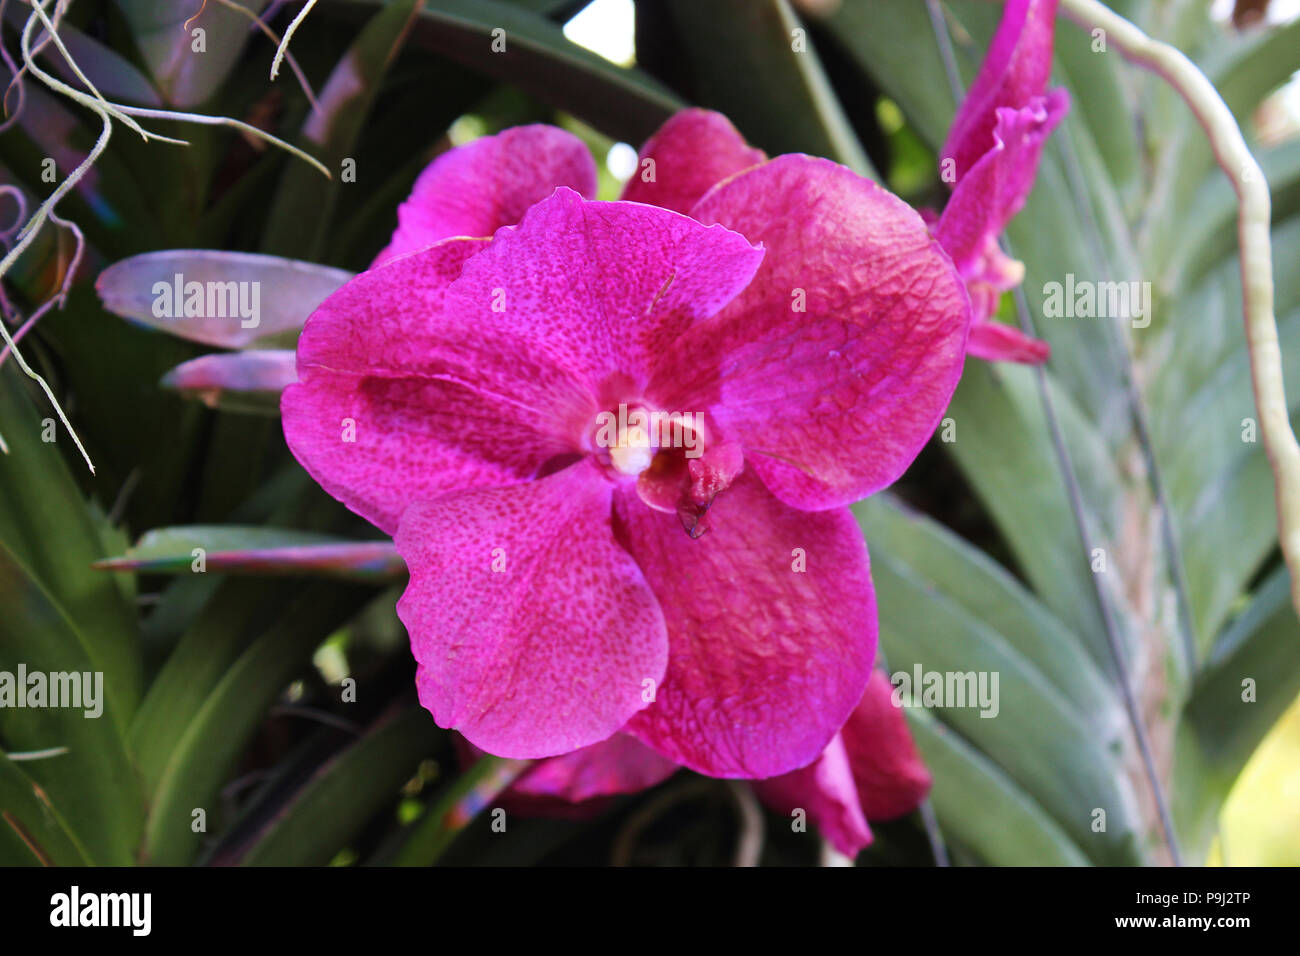 Close up of a pink Vanda orchid in full bloom Stock Photo